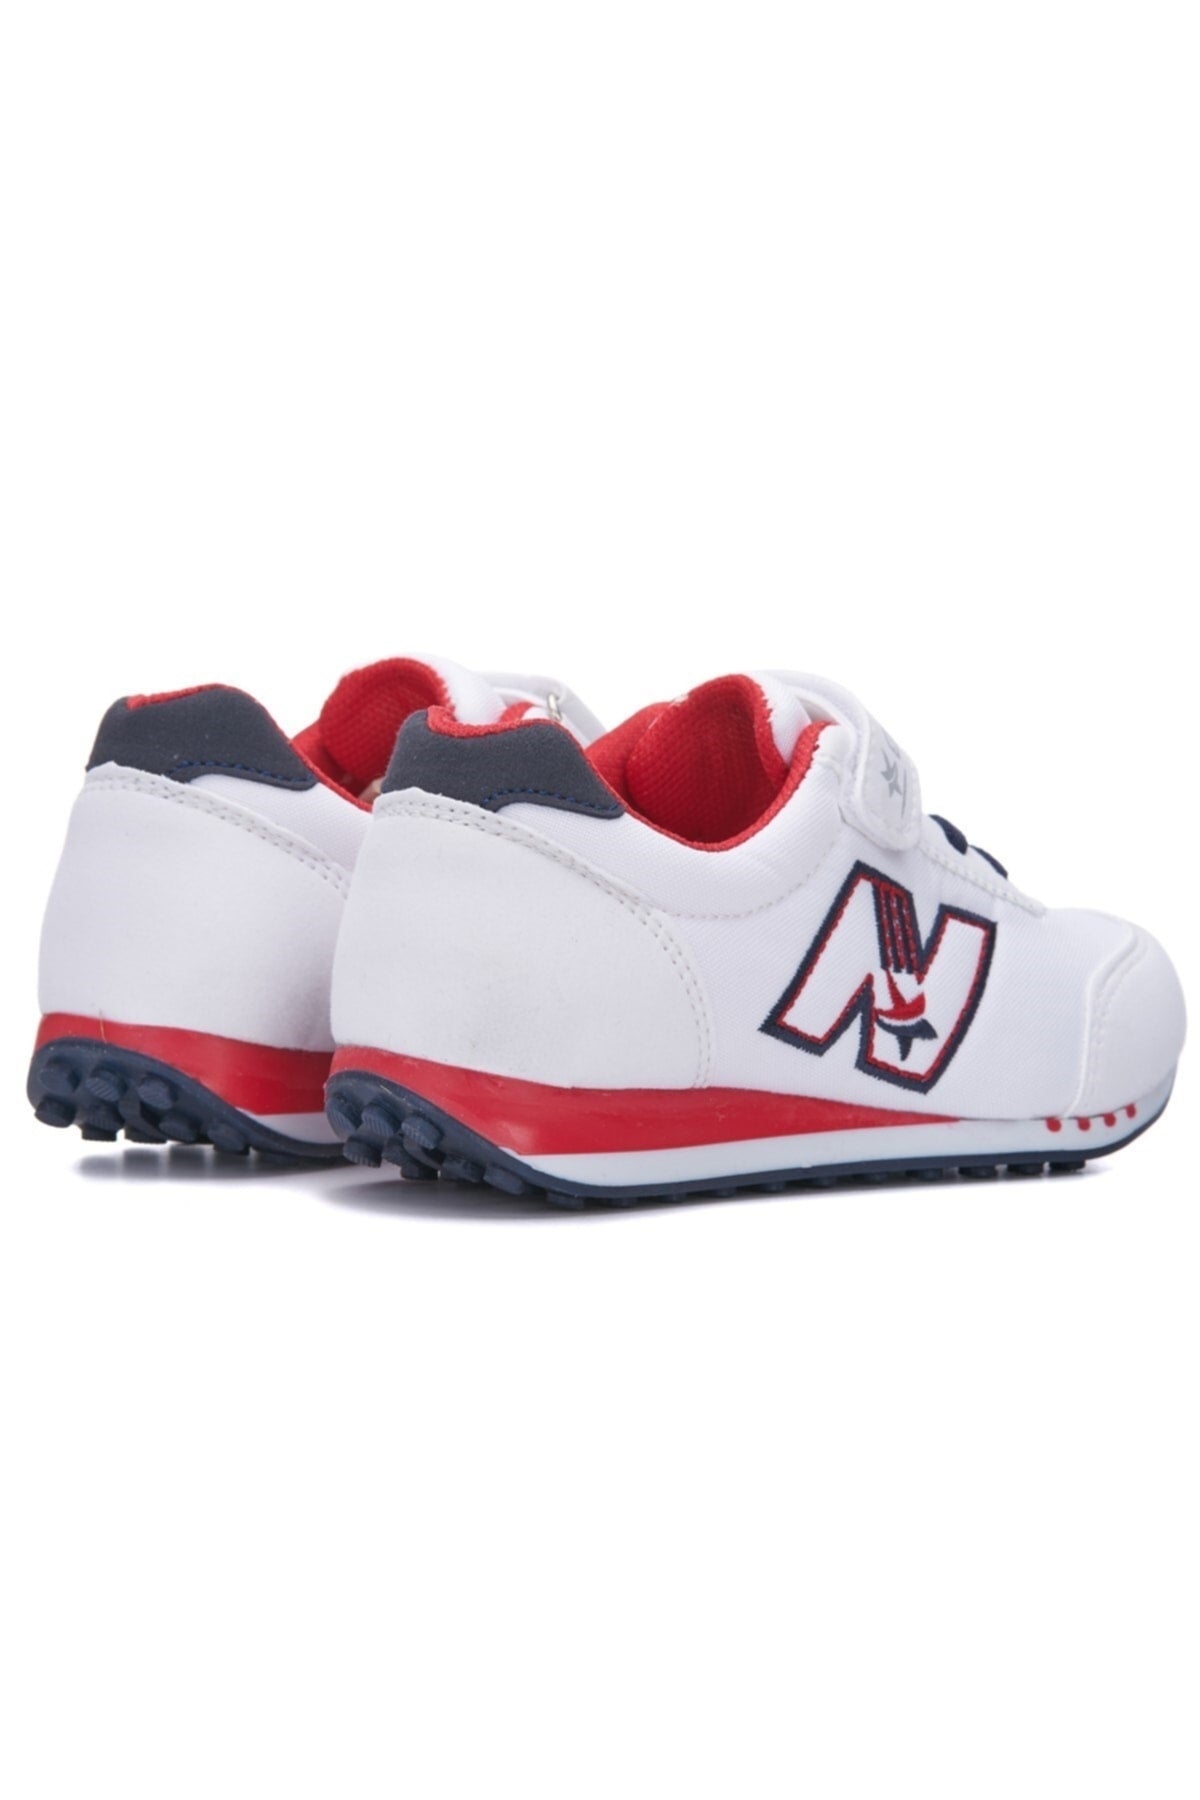 Children's Sport Shoes Call and Laced Daily Casual Sneaker